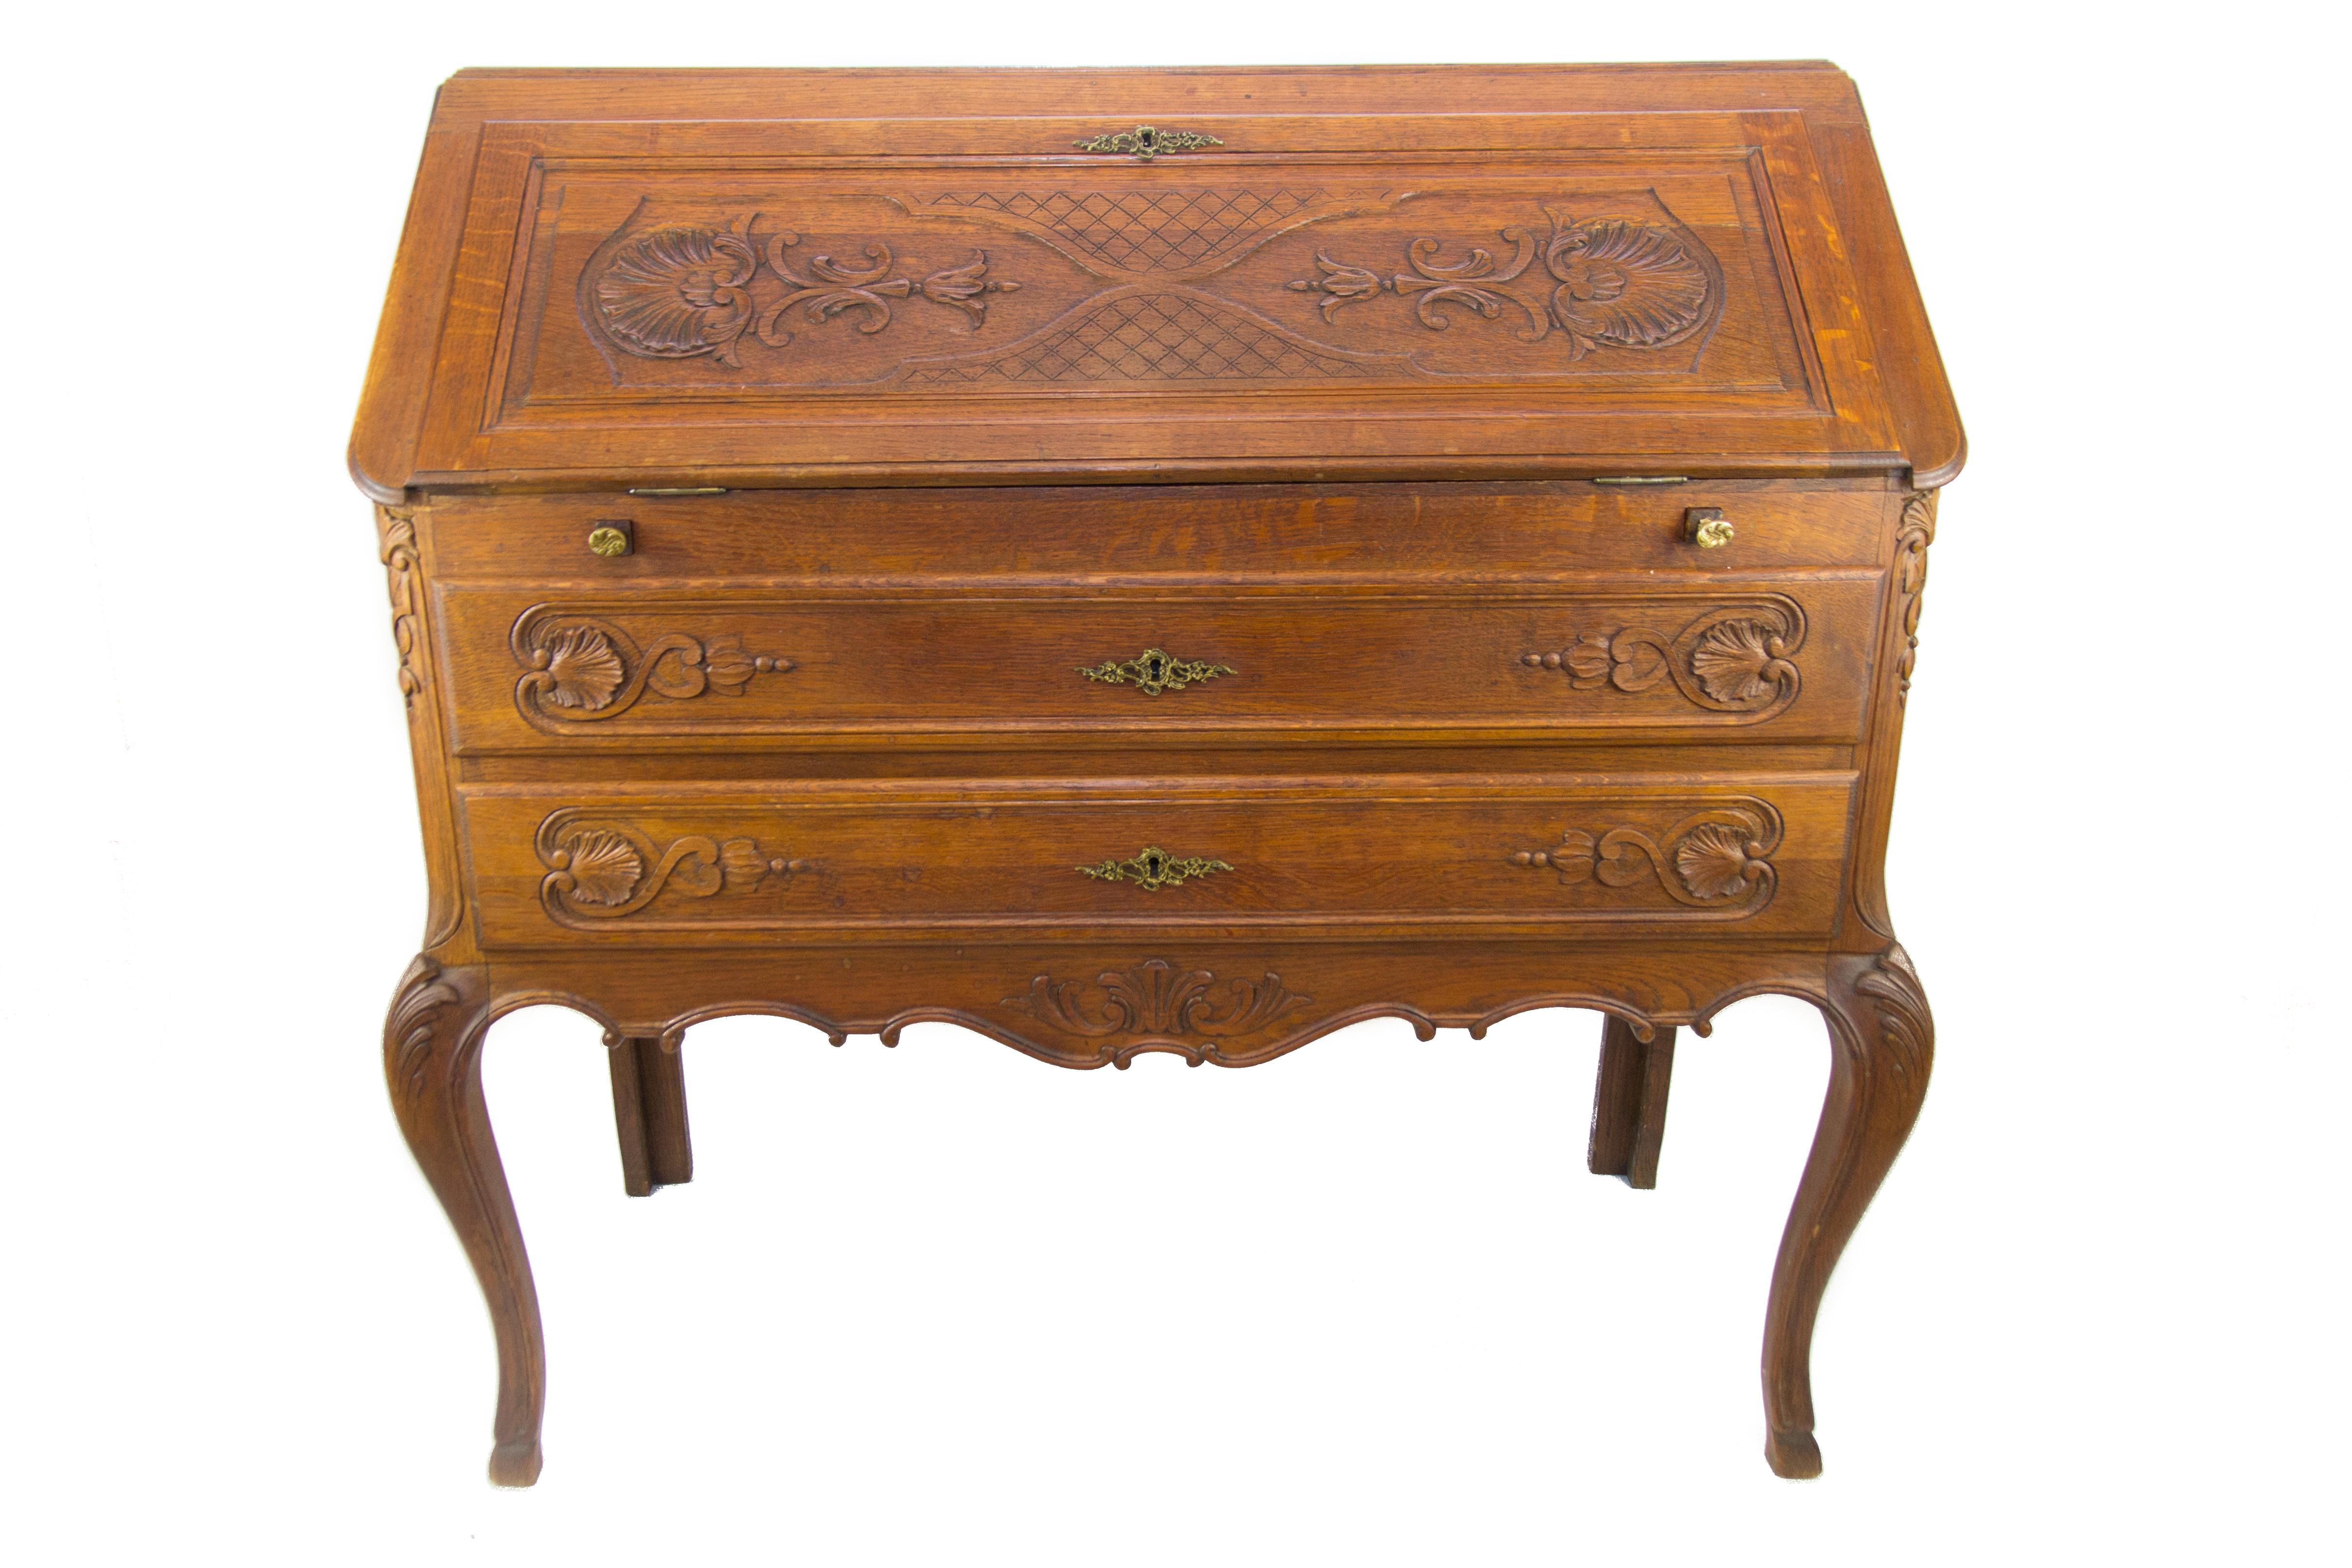 Louis XV Style carved oak drop front secretary or bureau or writing desk, France, 1930s.
Opened it reveals a fitted desk interior with four drawers and a large writing area, supported by two pullout / pull-out supports/rests.
Dimensions: height 100